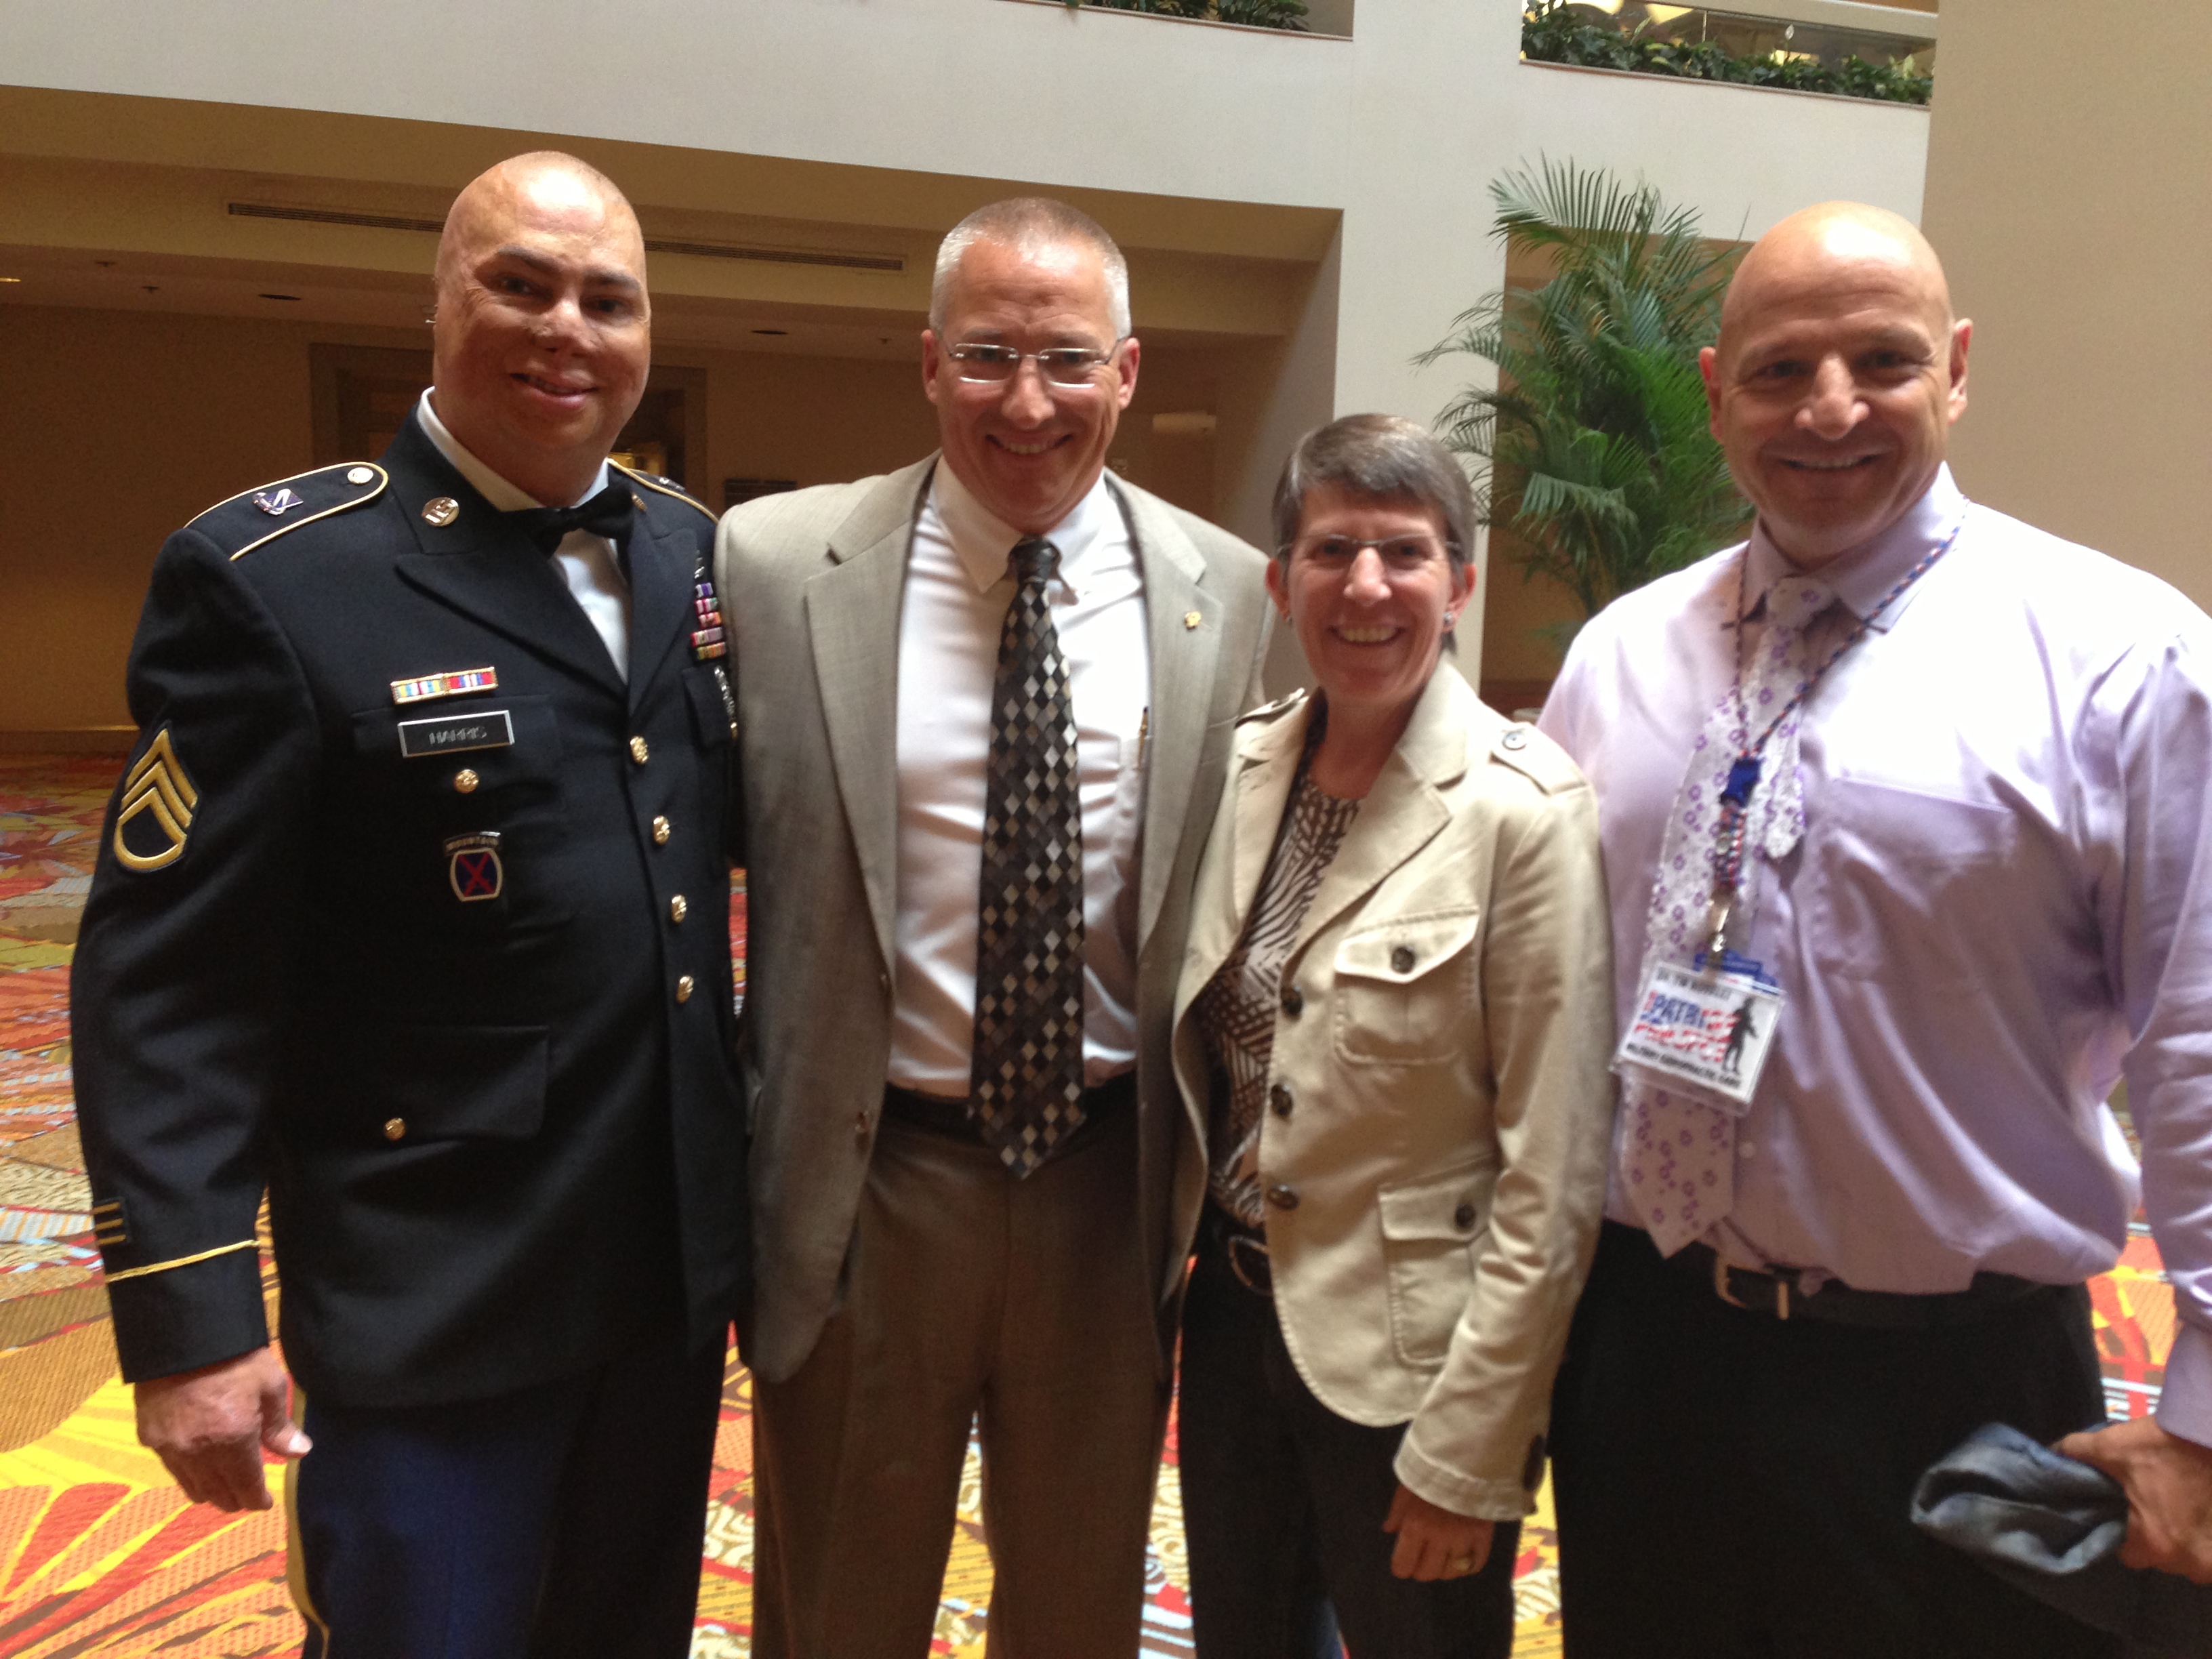 Patriot Project supporters retired US Army Staff Sgt. Shilo Harris (l-r); DuBois; retired US Army Brig. Gen. Rebecca Halstead; and Novelli, DC, pose together at FCA’s National Conference in August.